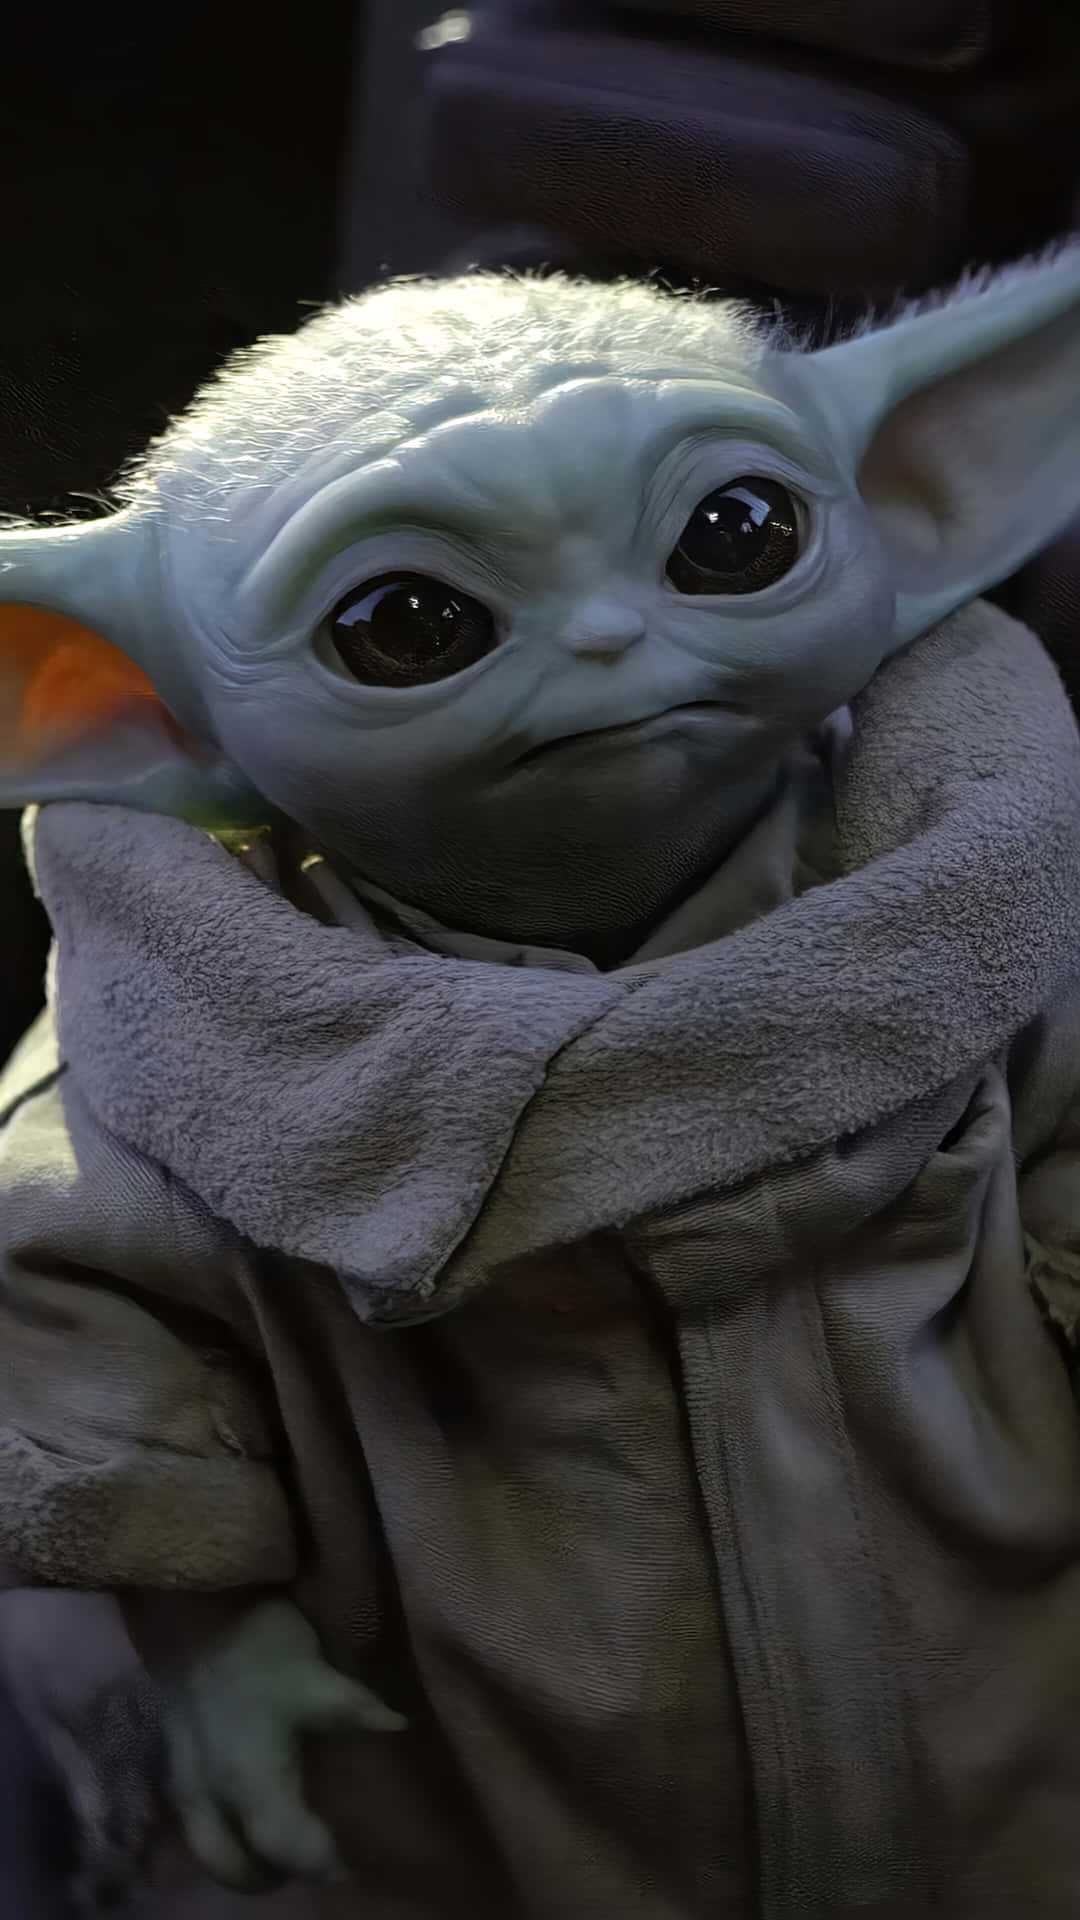 Get your hands on the newest and cutest mobile phones: Baby Yoda! Wallpaper